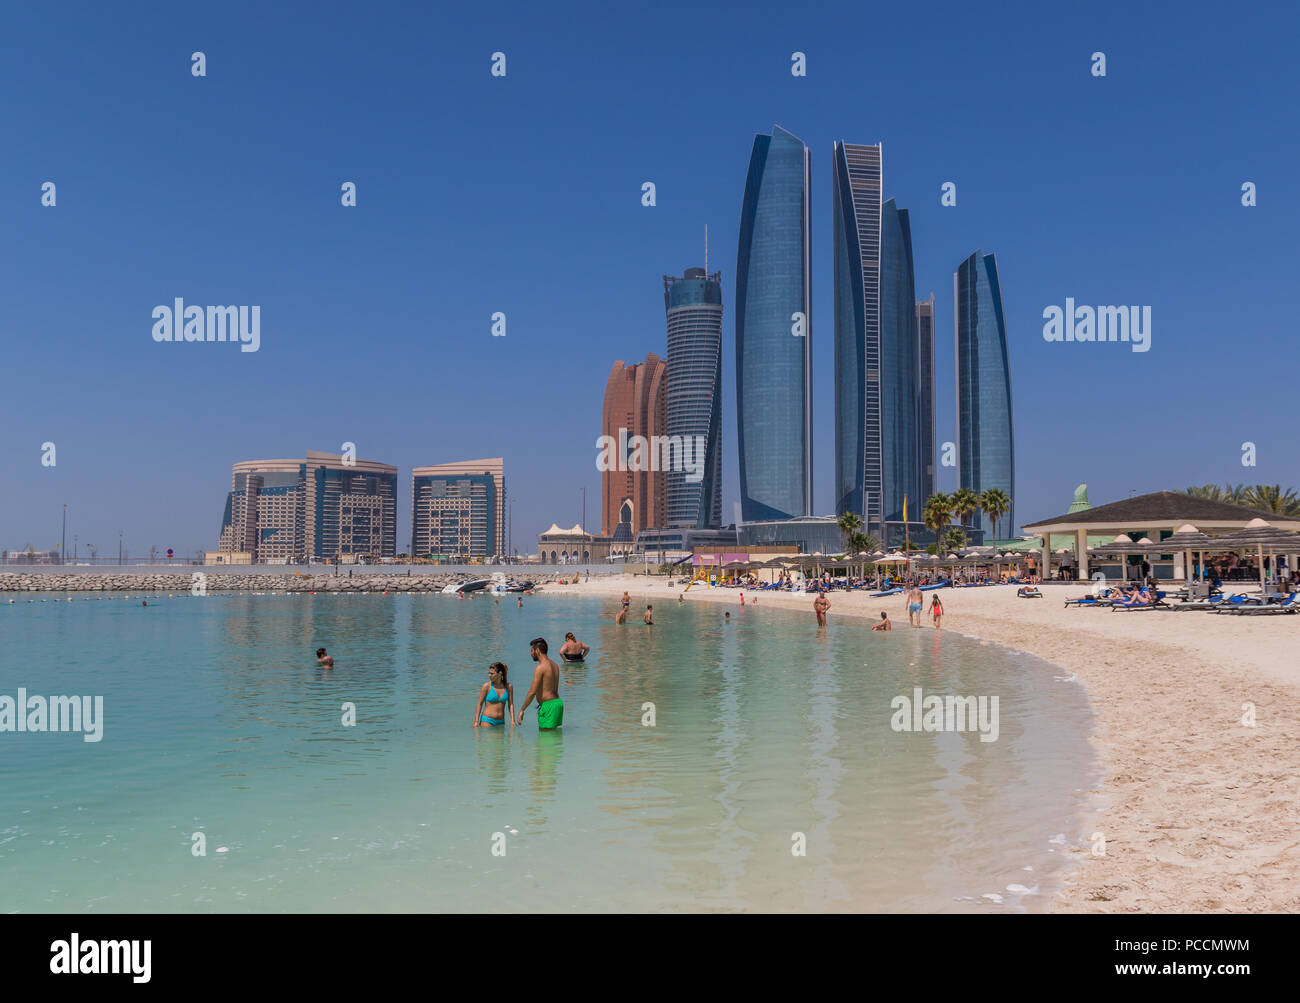 Abu Dhabi Like In The Nearby Dubai In Abu Dhabi There Is A Very